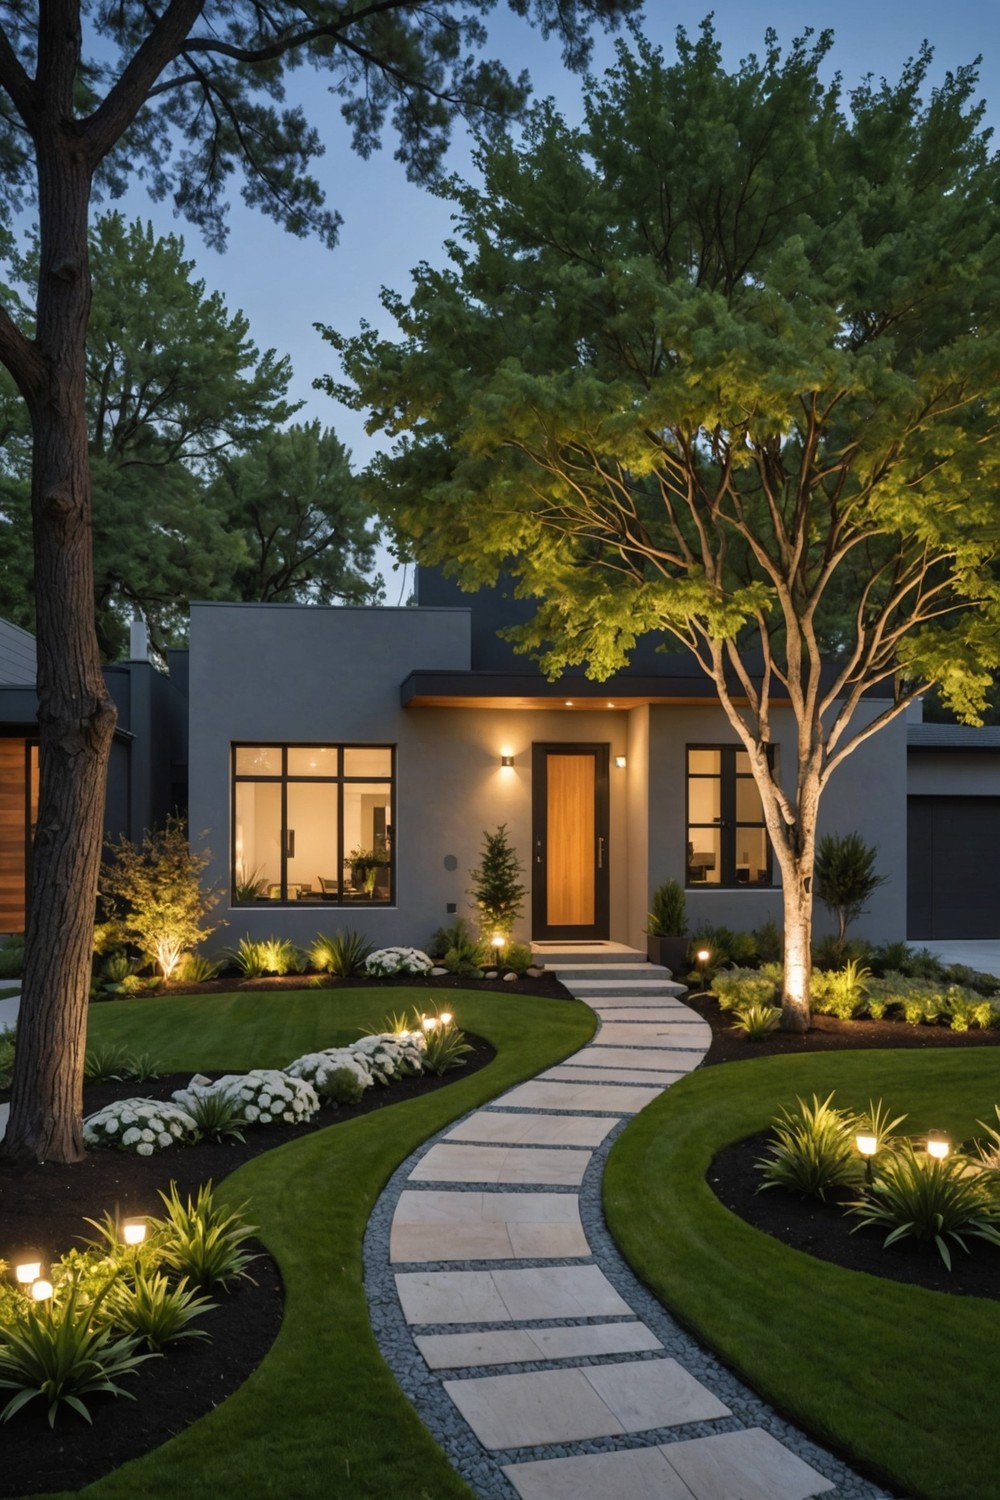 Creative Lighting to Highlight Front Yard Features